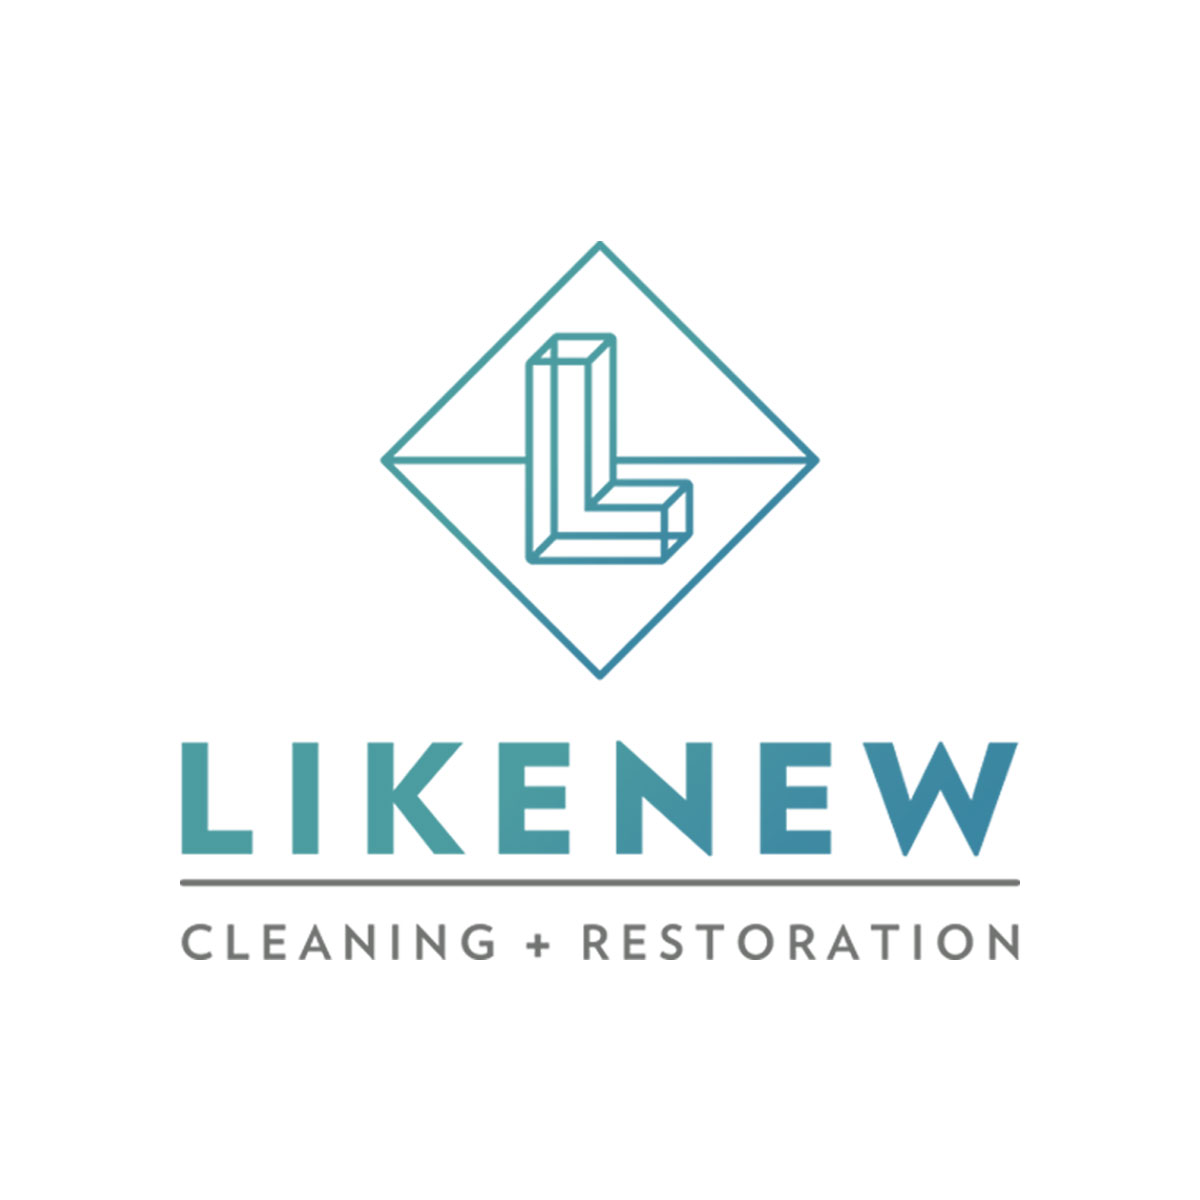 LikeNew logo design by logo designer Valiant Creative Agency for your inspiration and for the worlds largest logo competition